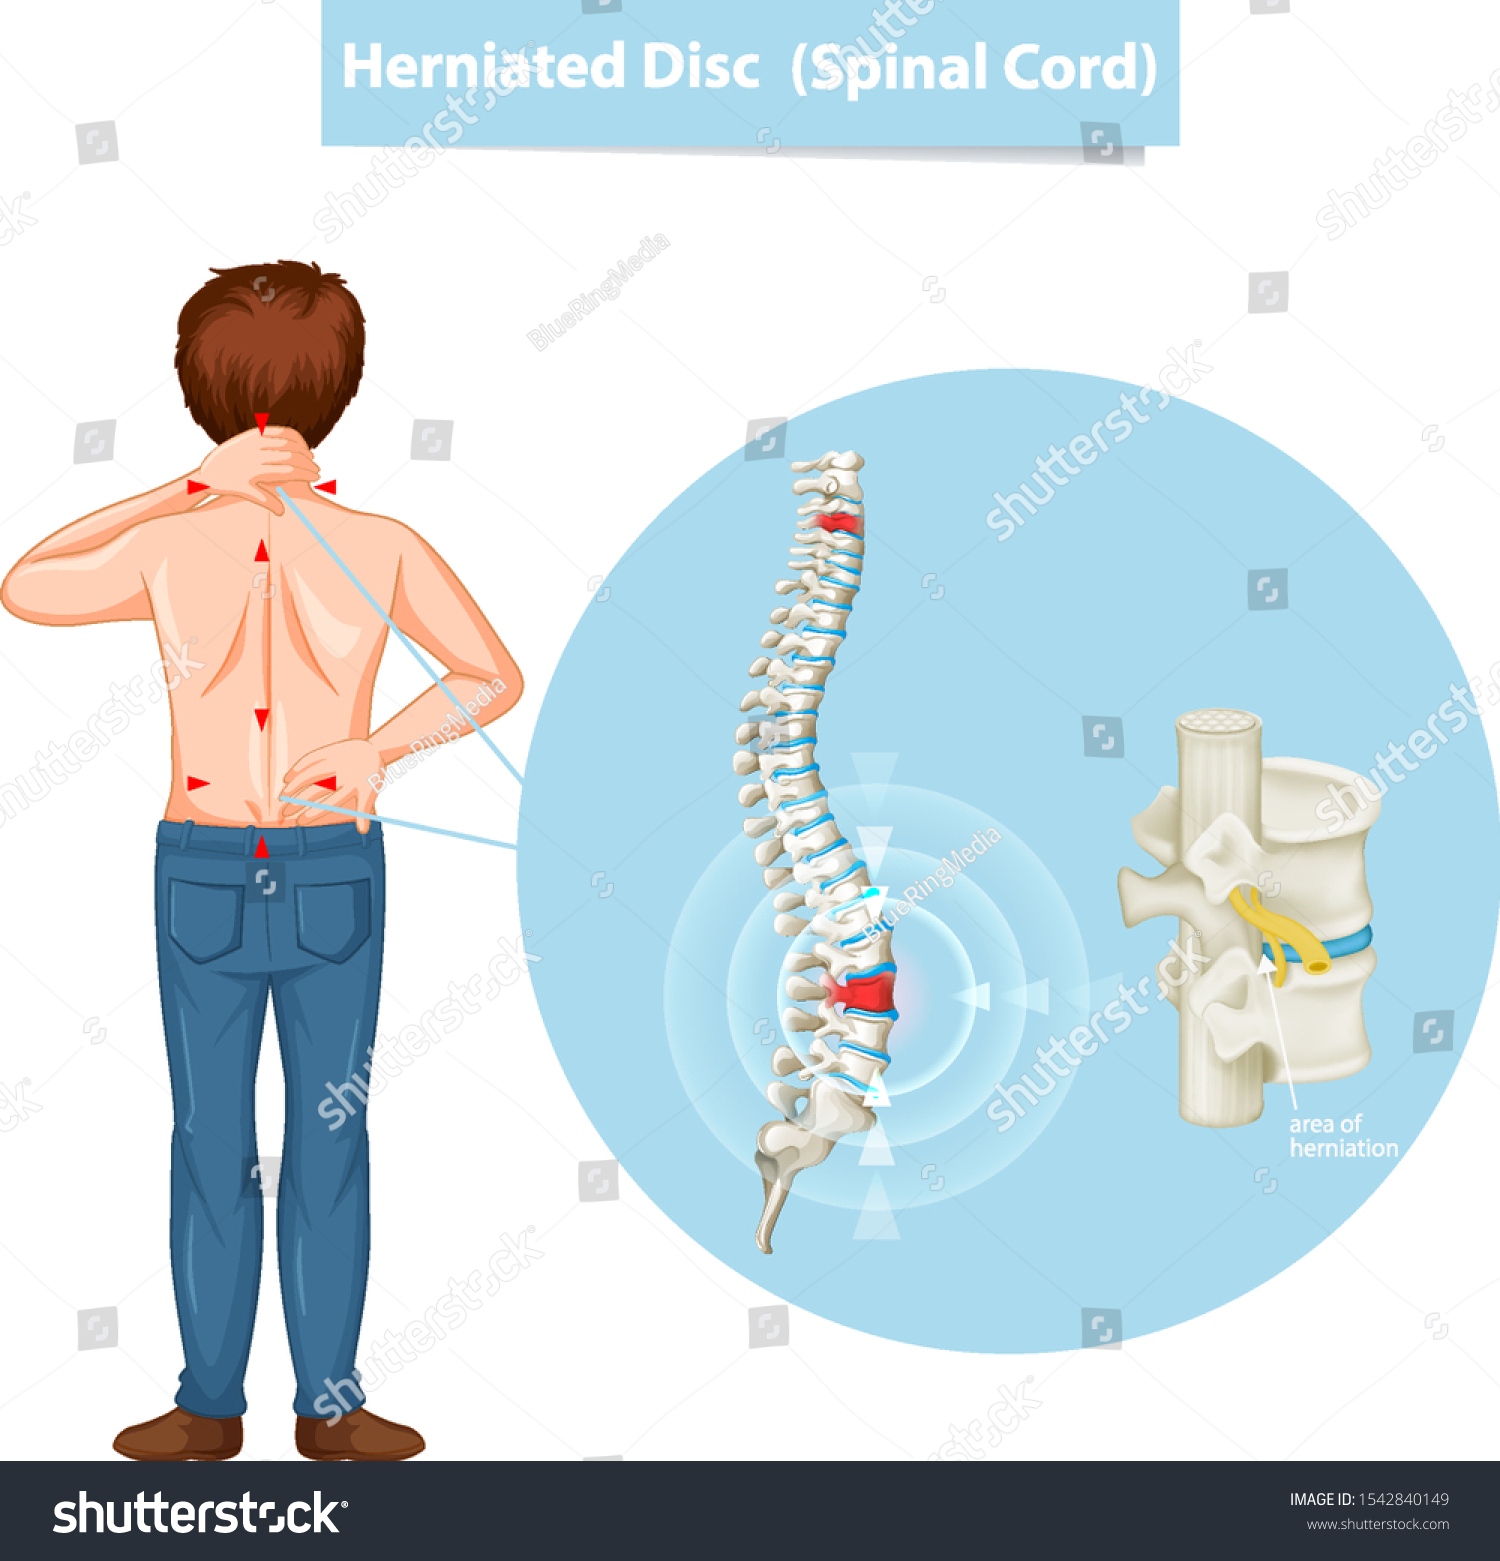 Diagram Showing Herniated Disc Illustration Royalty Free Stock Vector 1542840149